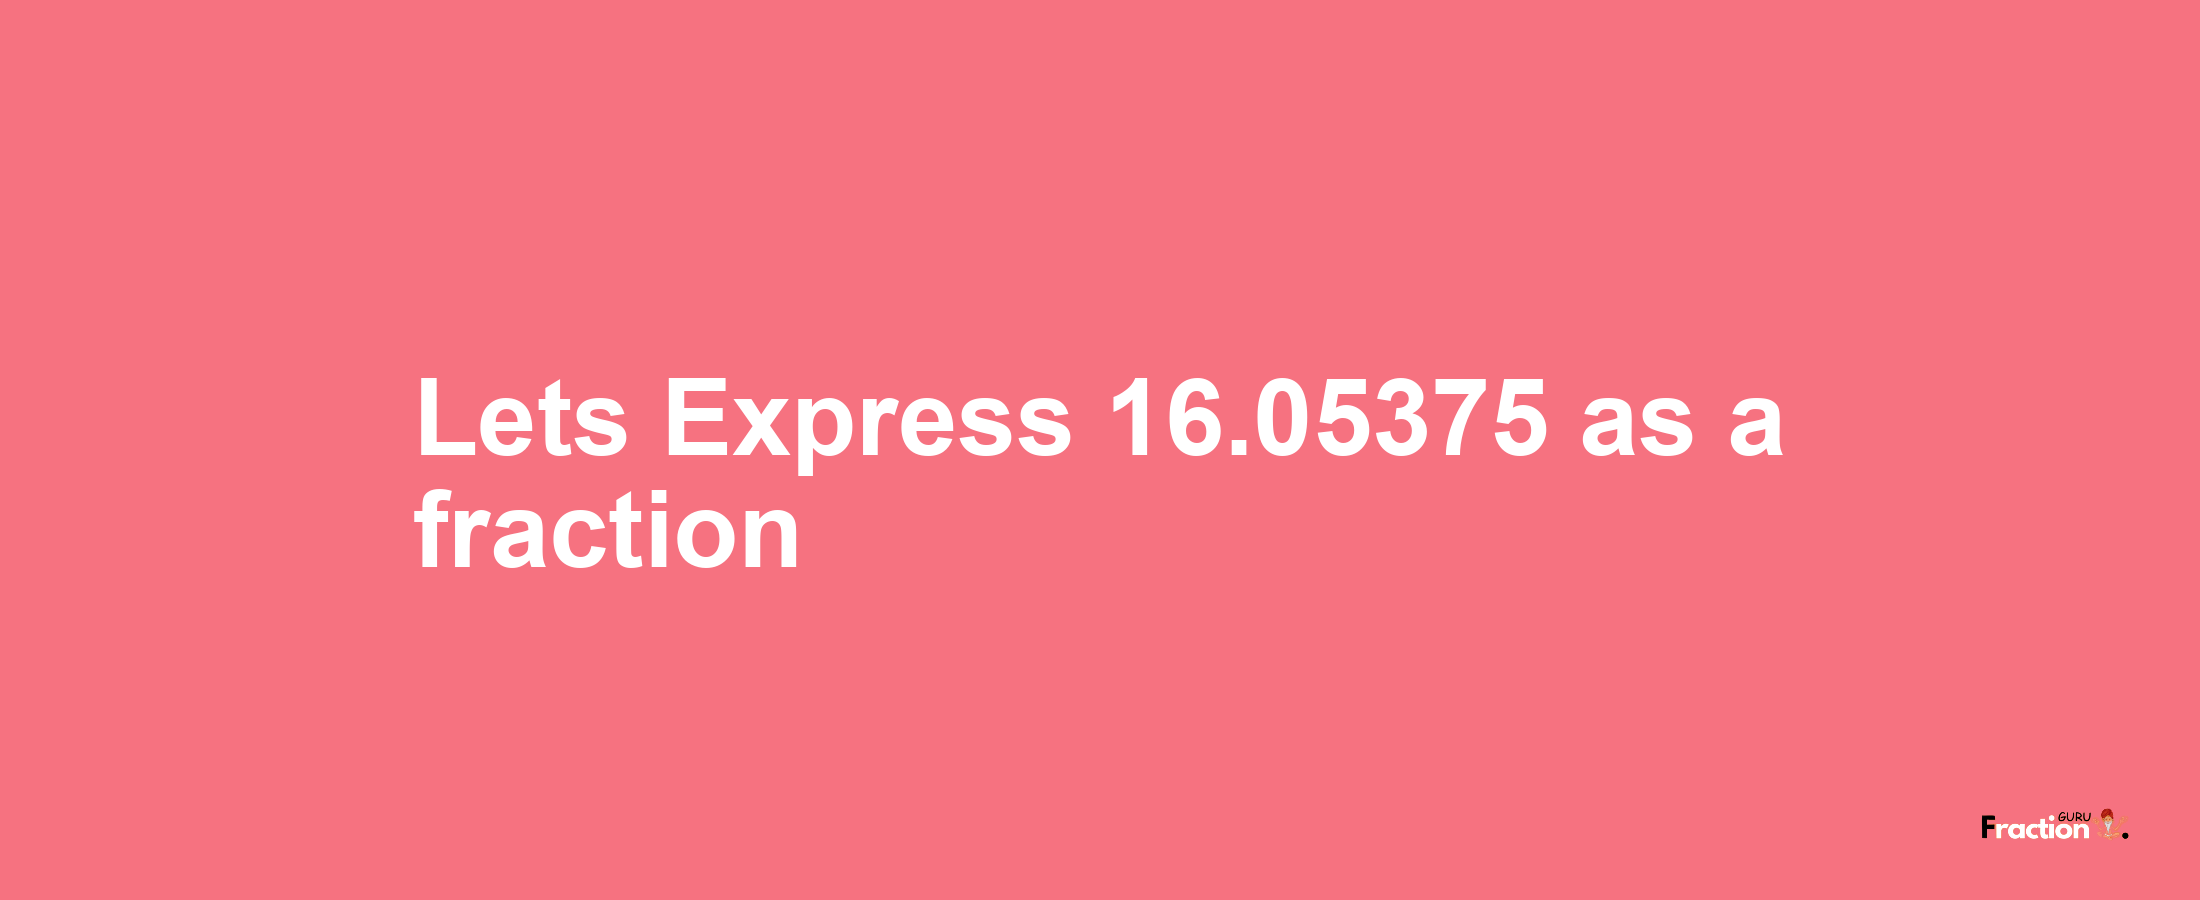 Lets Express 16.05375 as afraction